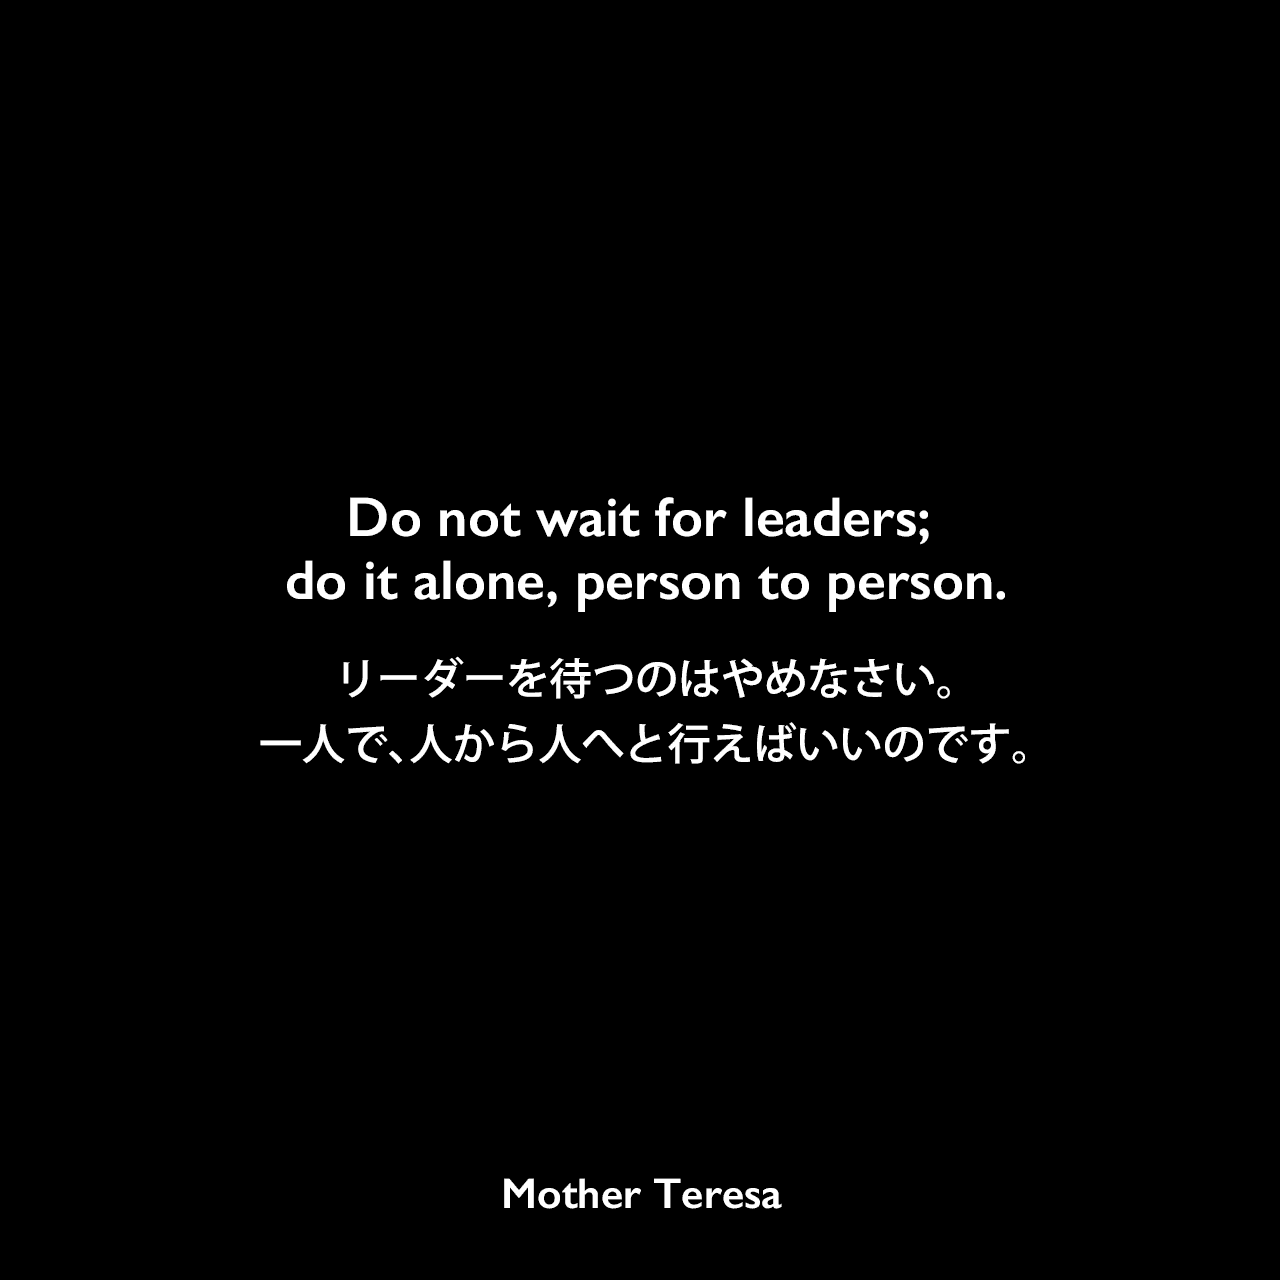 Do not wait for leaders; do it alone, person to person.リーダーを待つのはやめなさい。一人で、人から人へと行えばいいのです。